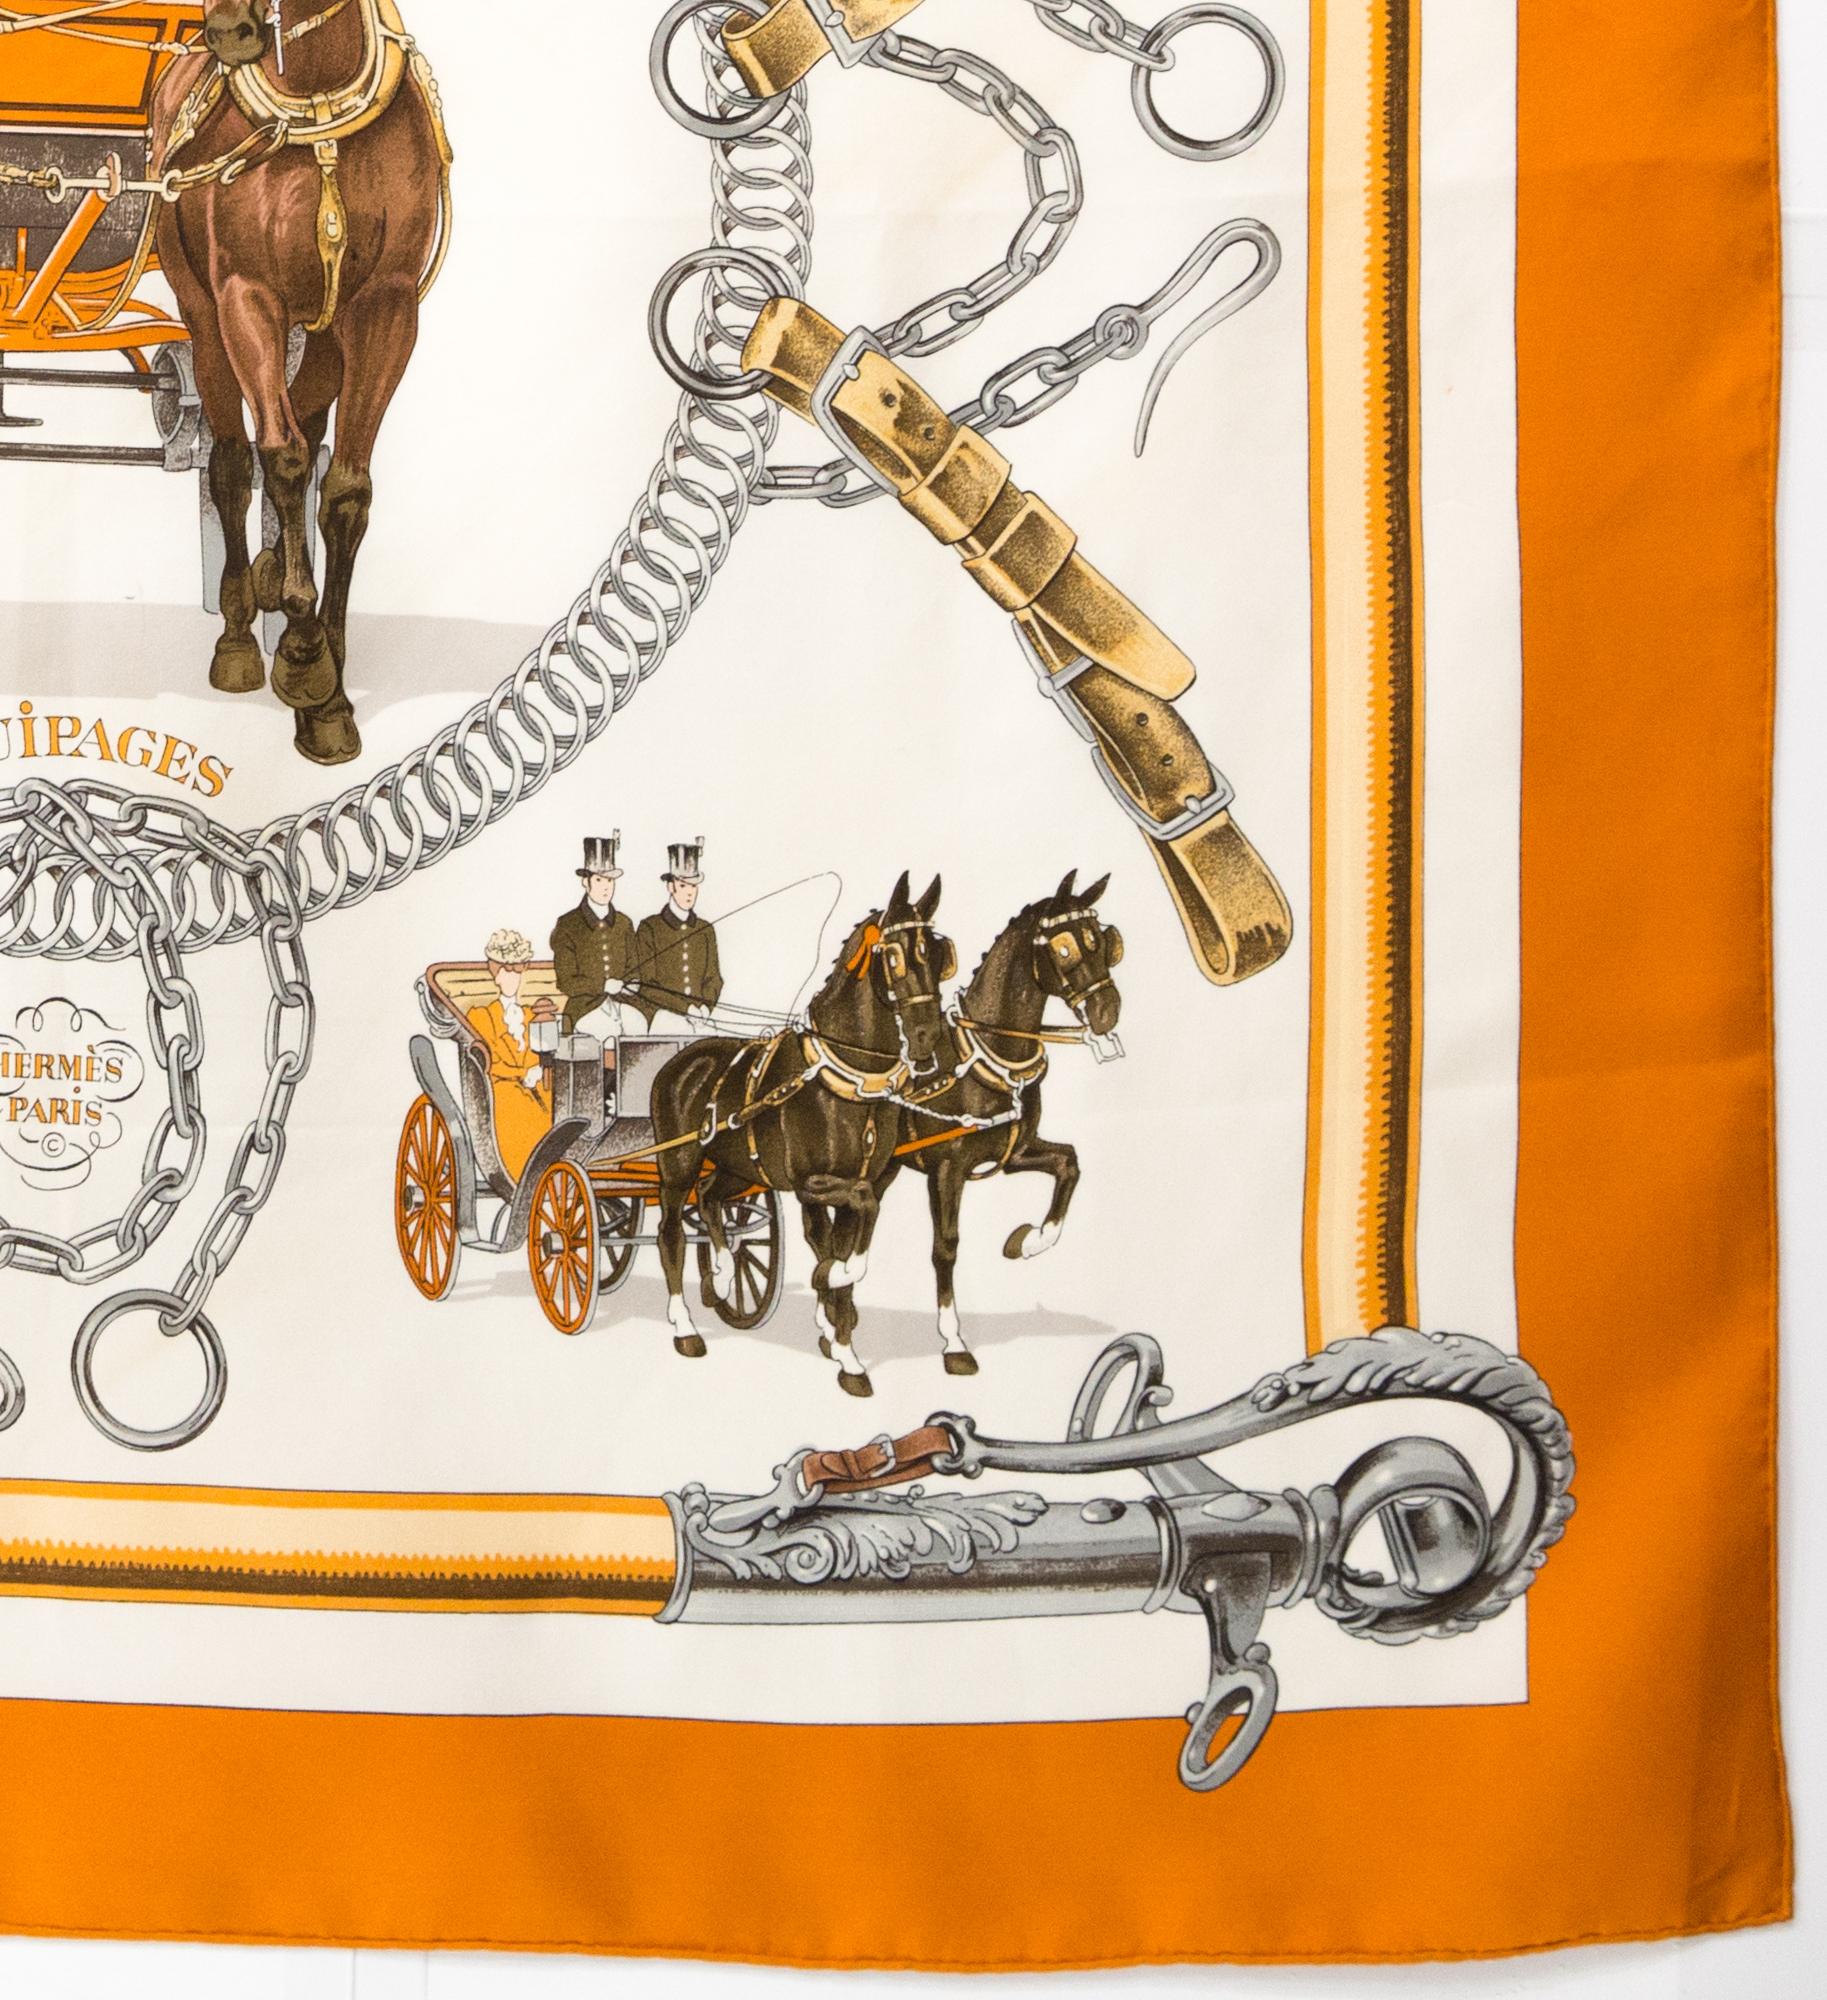 Hermes Equipages by Ledoux Silk Scarf 1